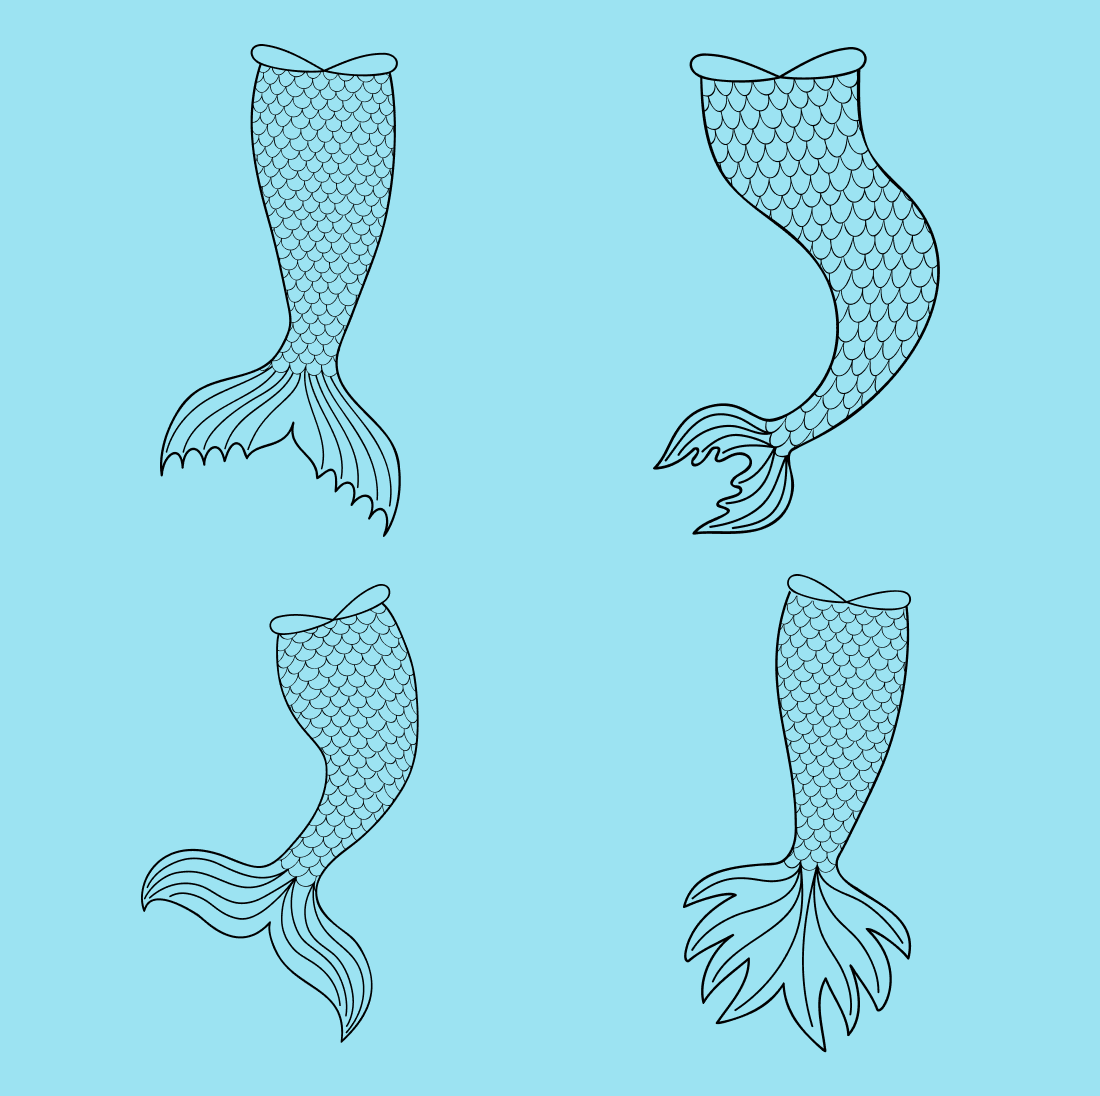 Different types of mermaid tail contours with painted scales on a blue background.